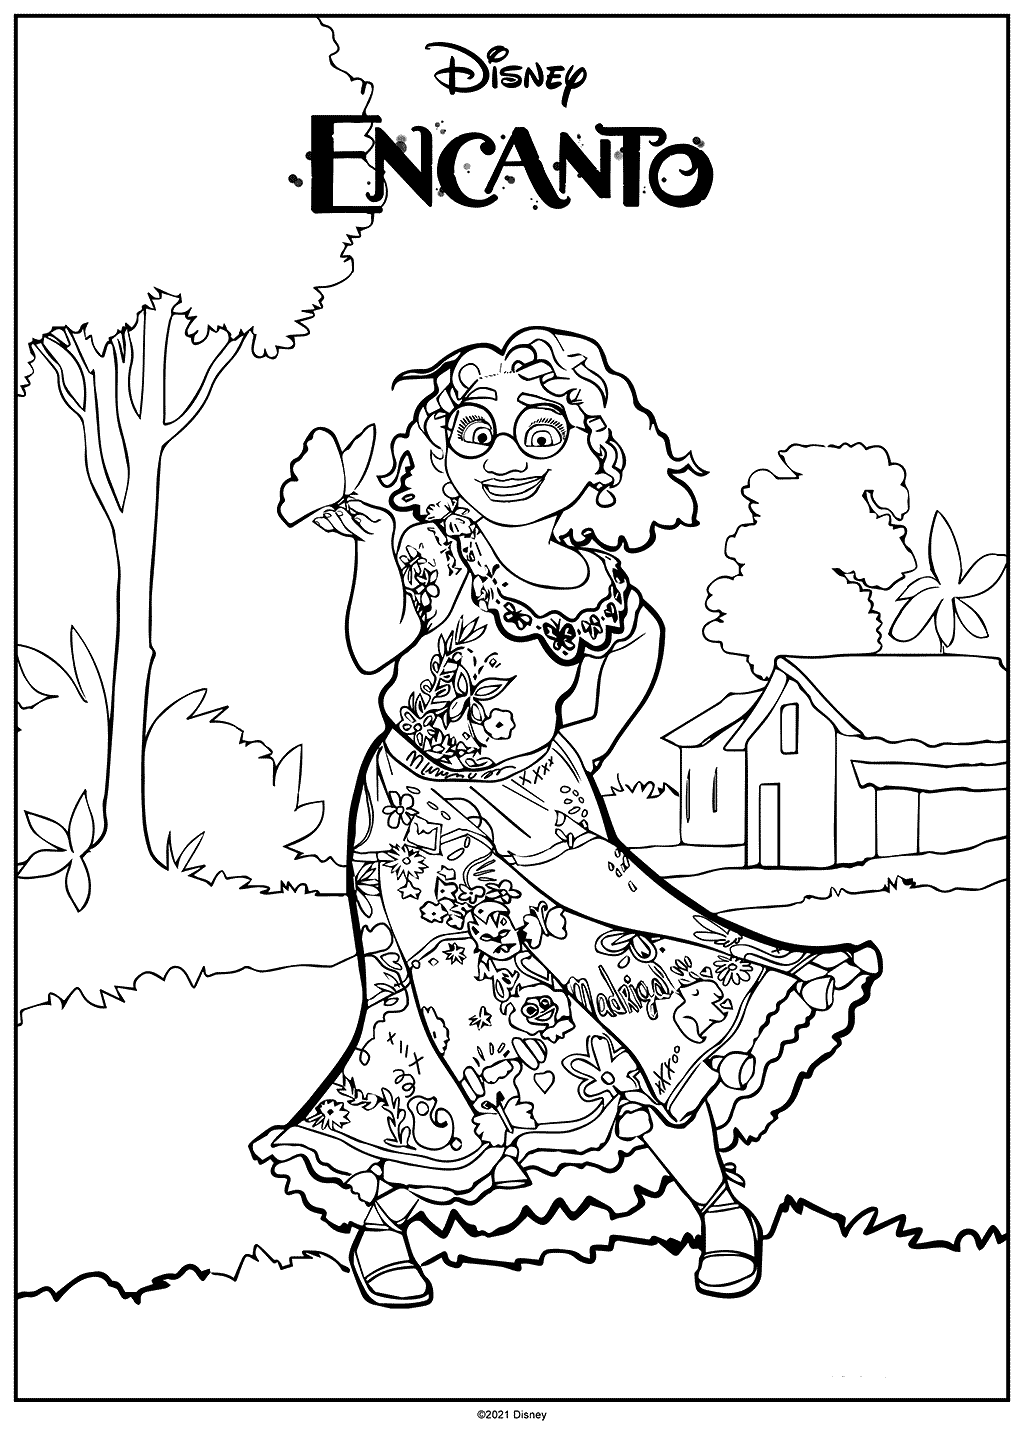 Mirabel from Encanto coloring page